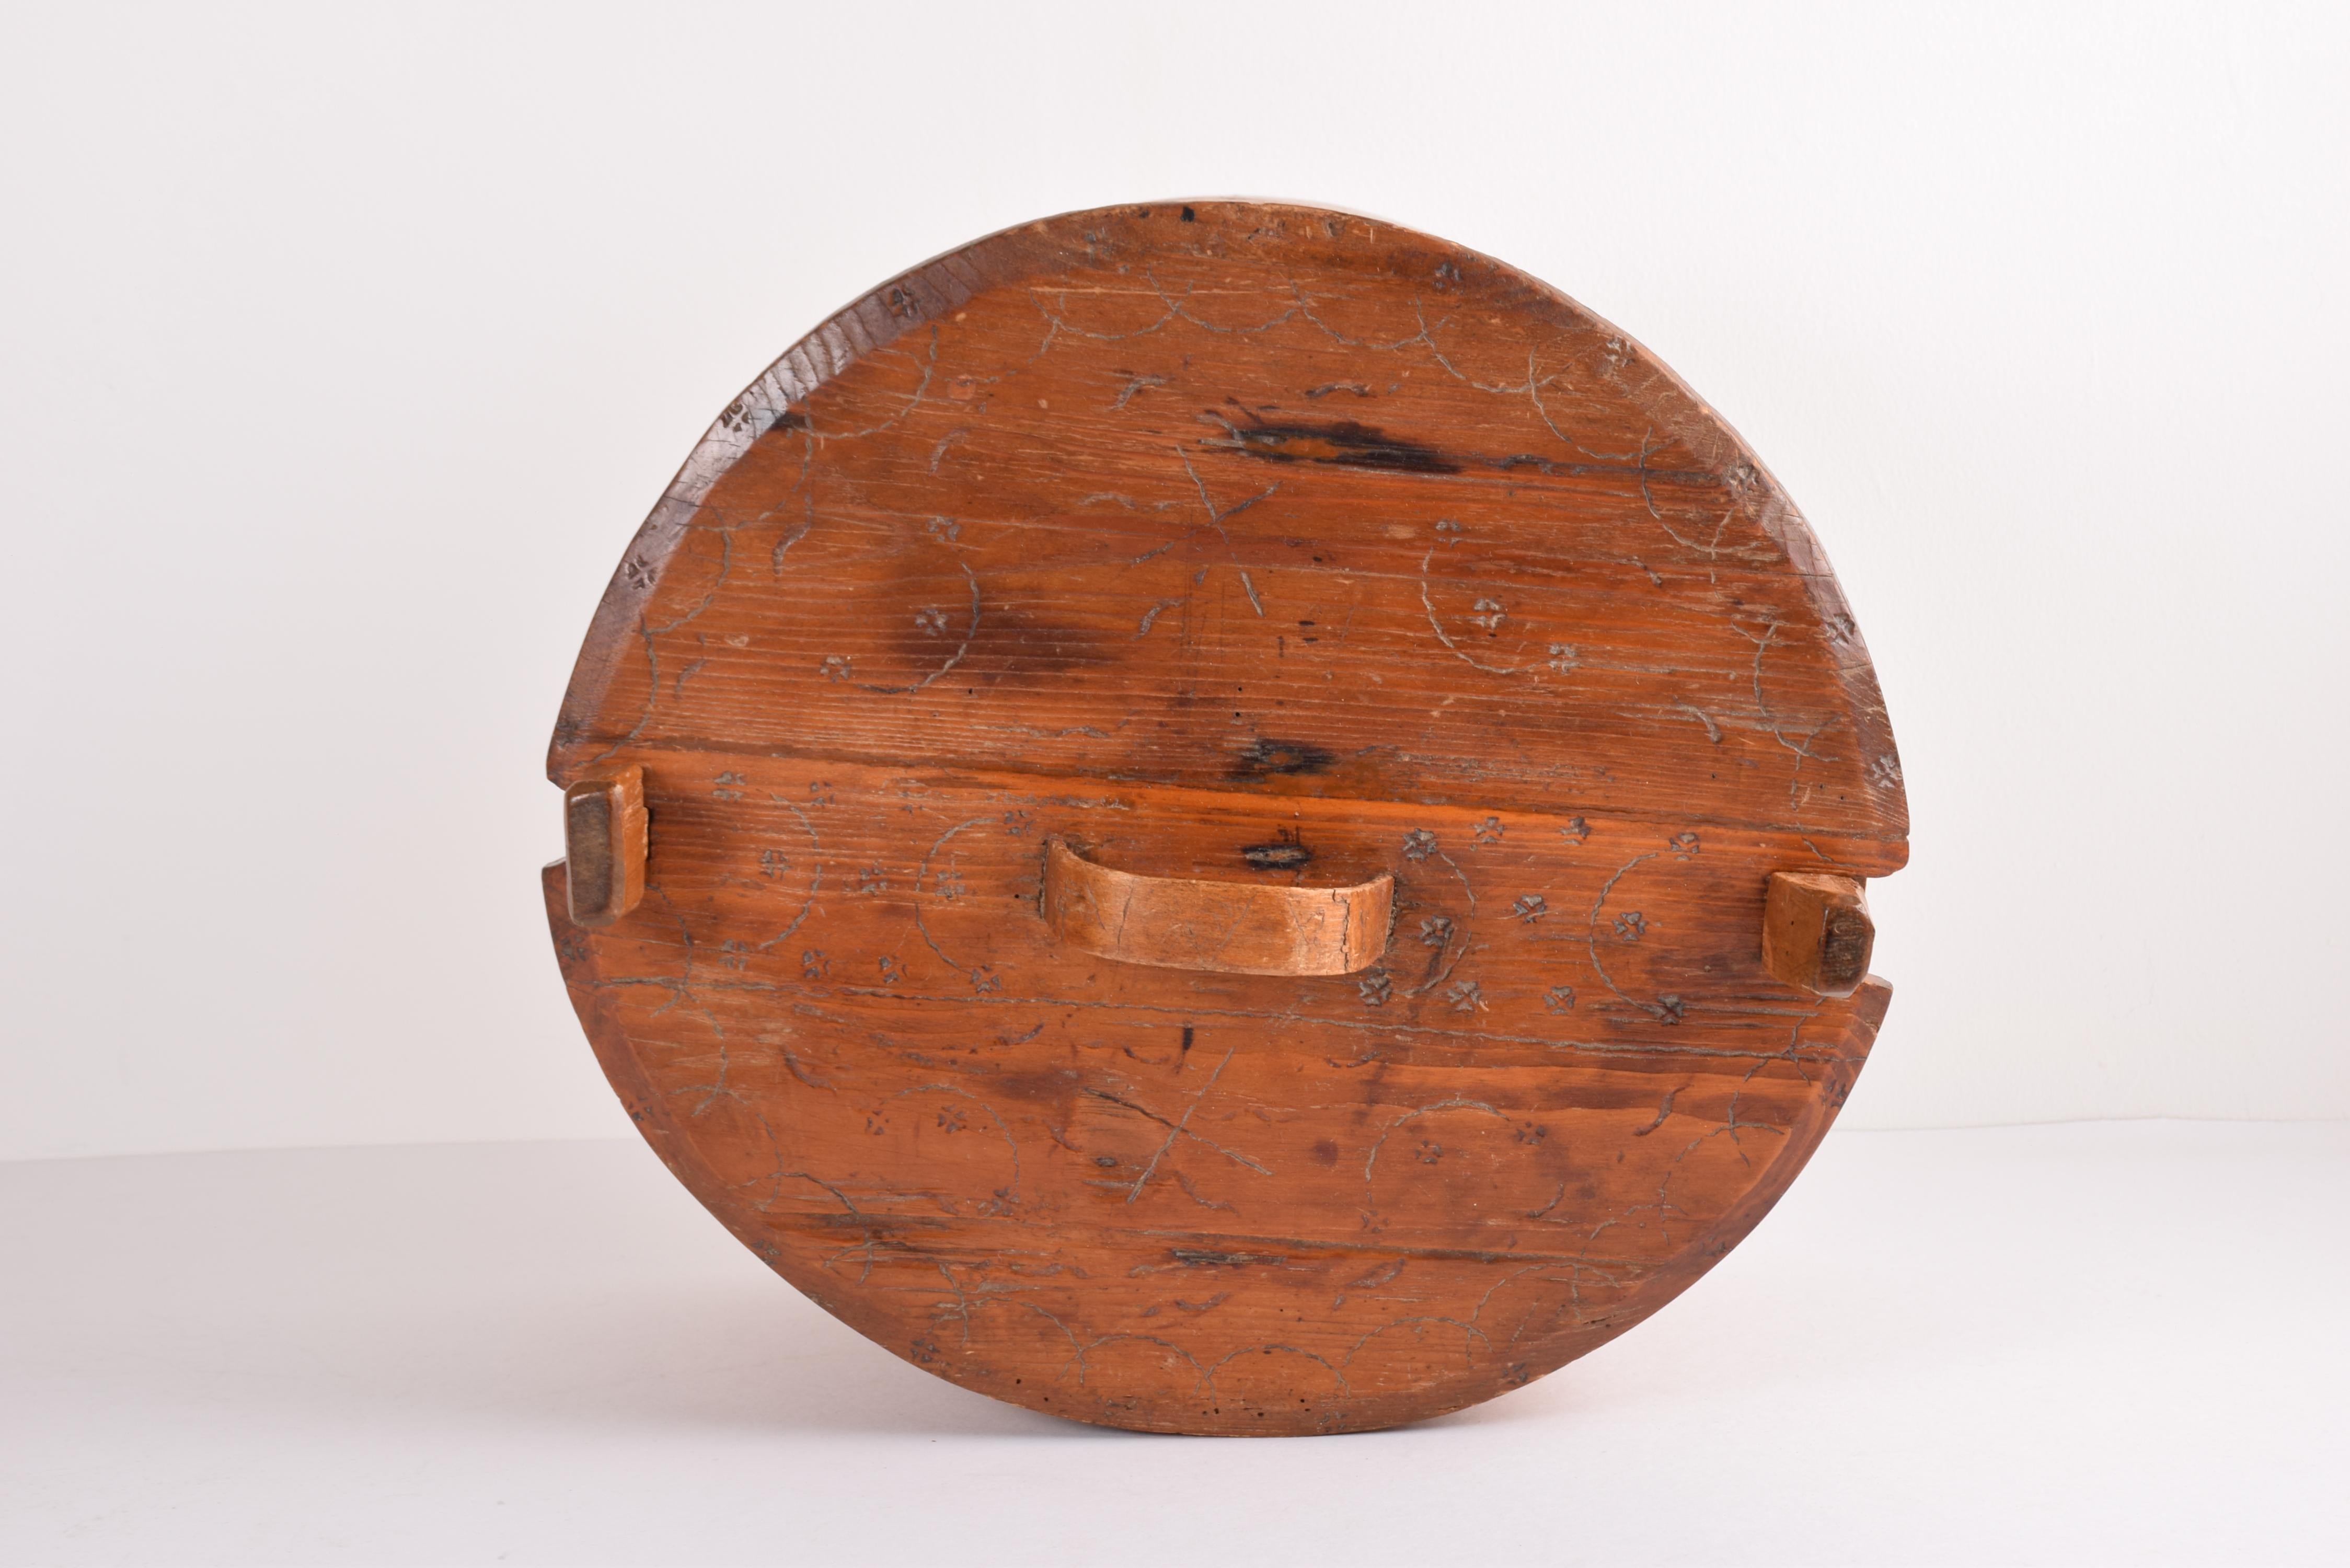 Wood Antique Scandinavian Round Storage Box “Tejne” Decorated Pine, Late 19th Century For Sale